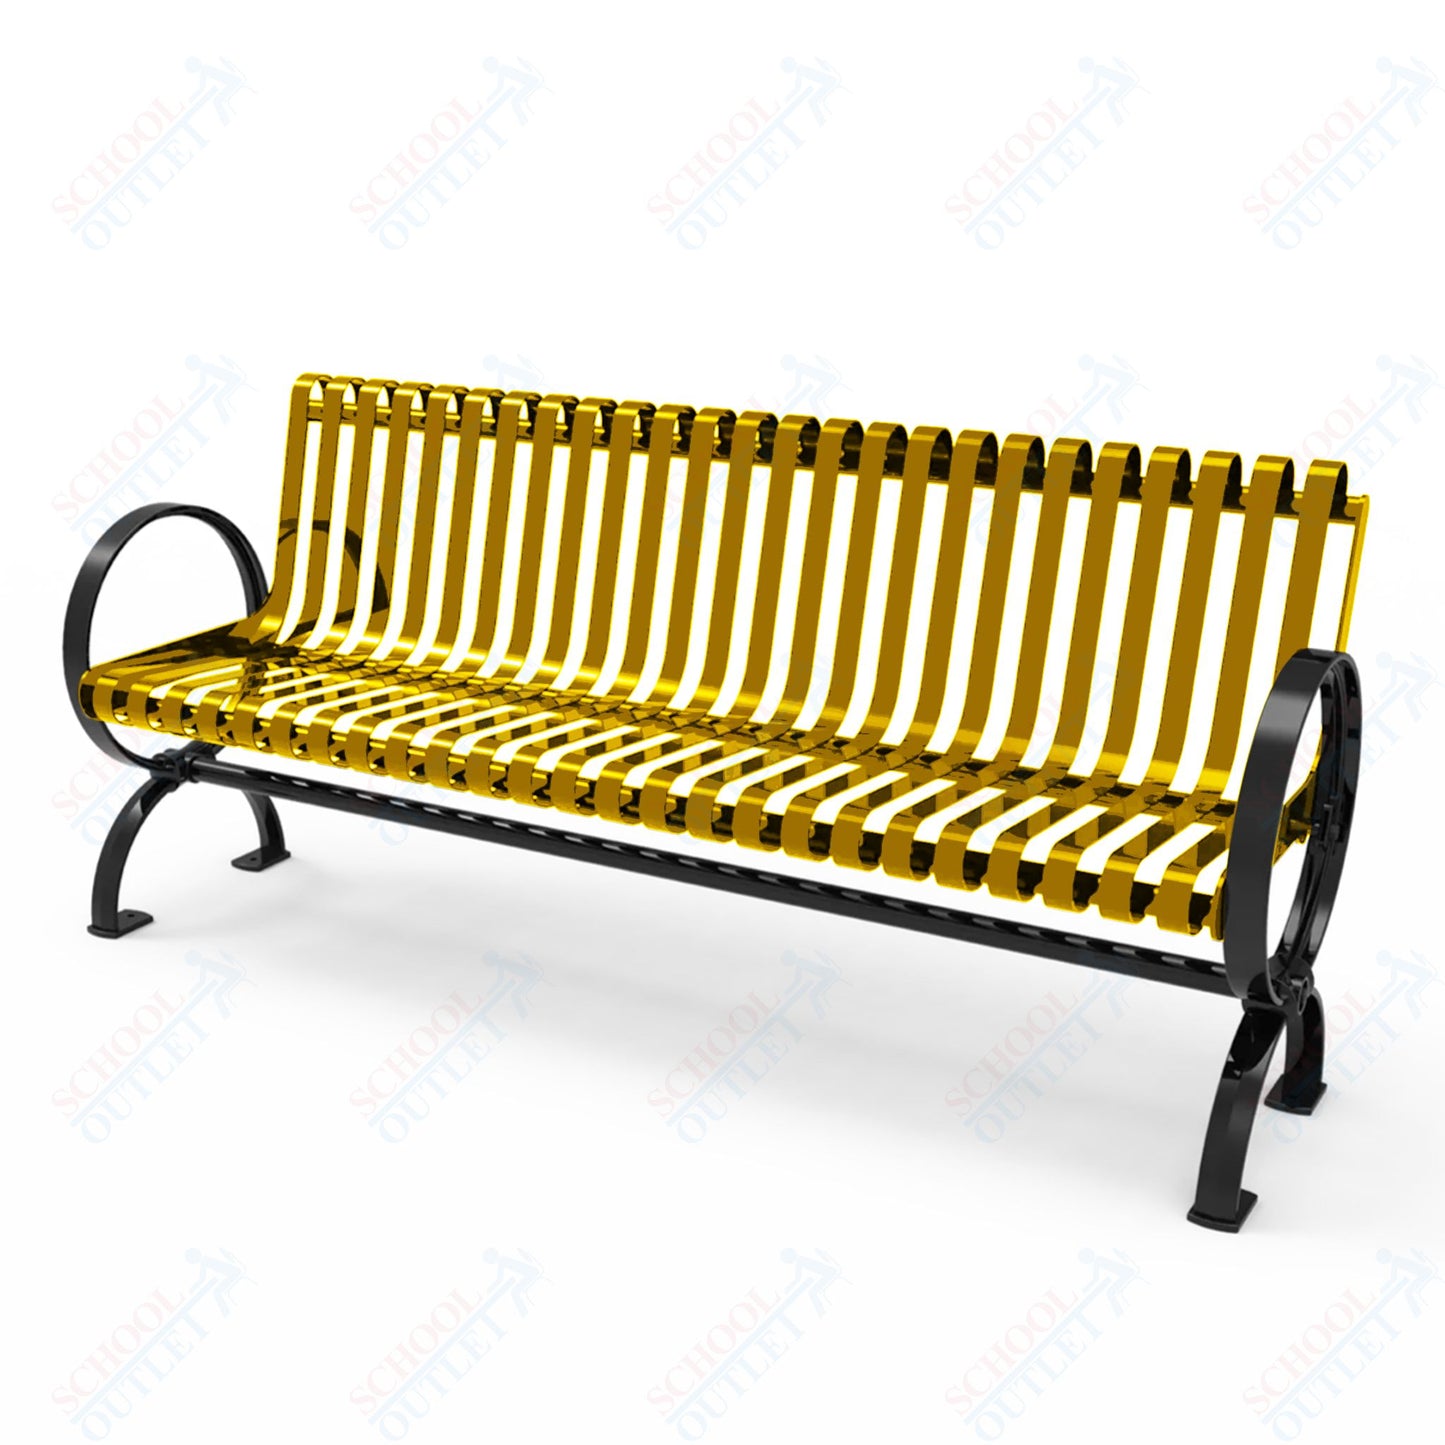 MyTcoat - Village Outdoor Bench with Rolled Back - Portable or Surface Mount 6' L (MYT-BVL06-R-58)